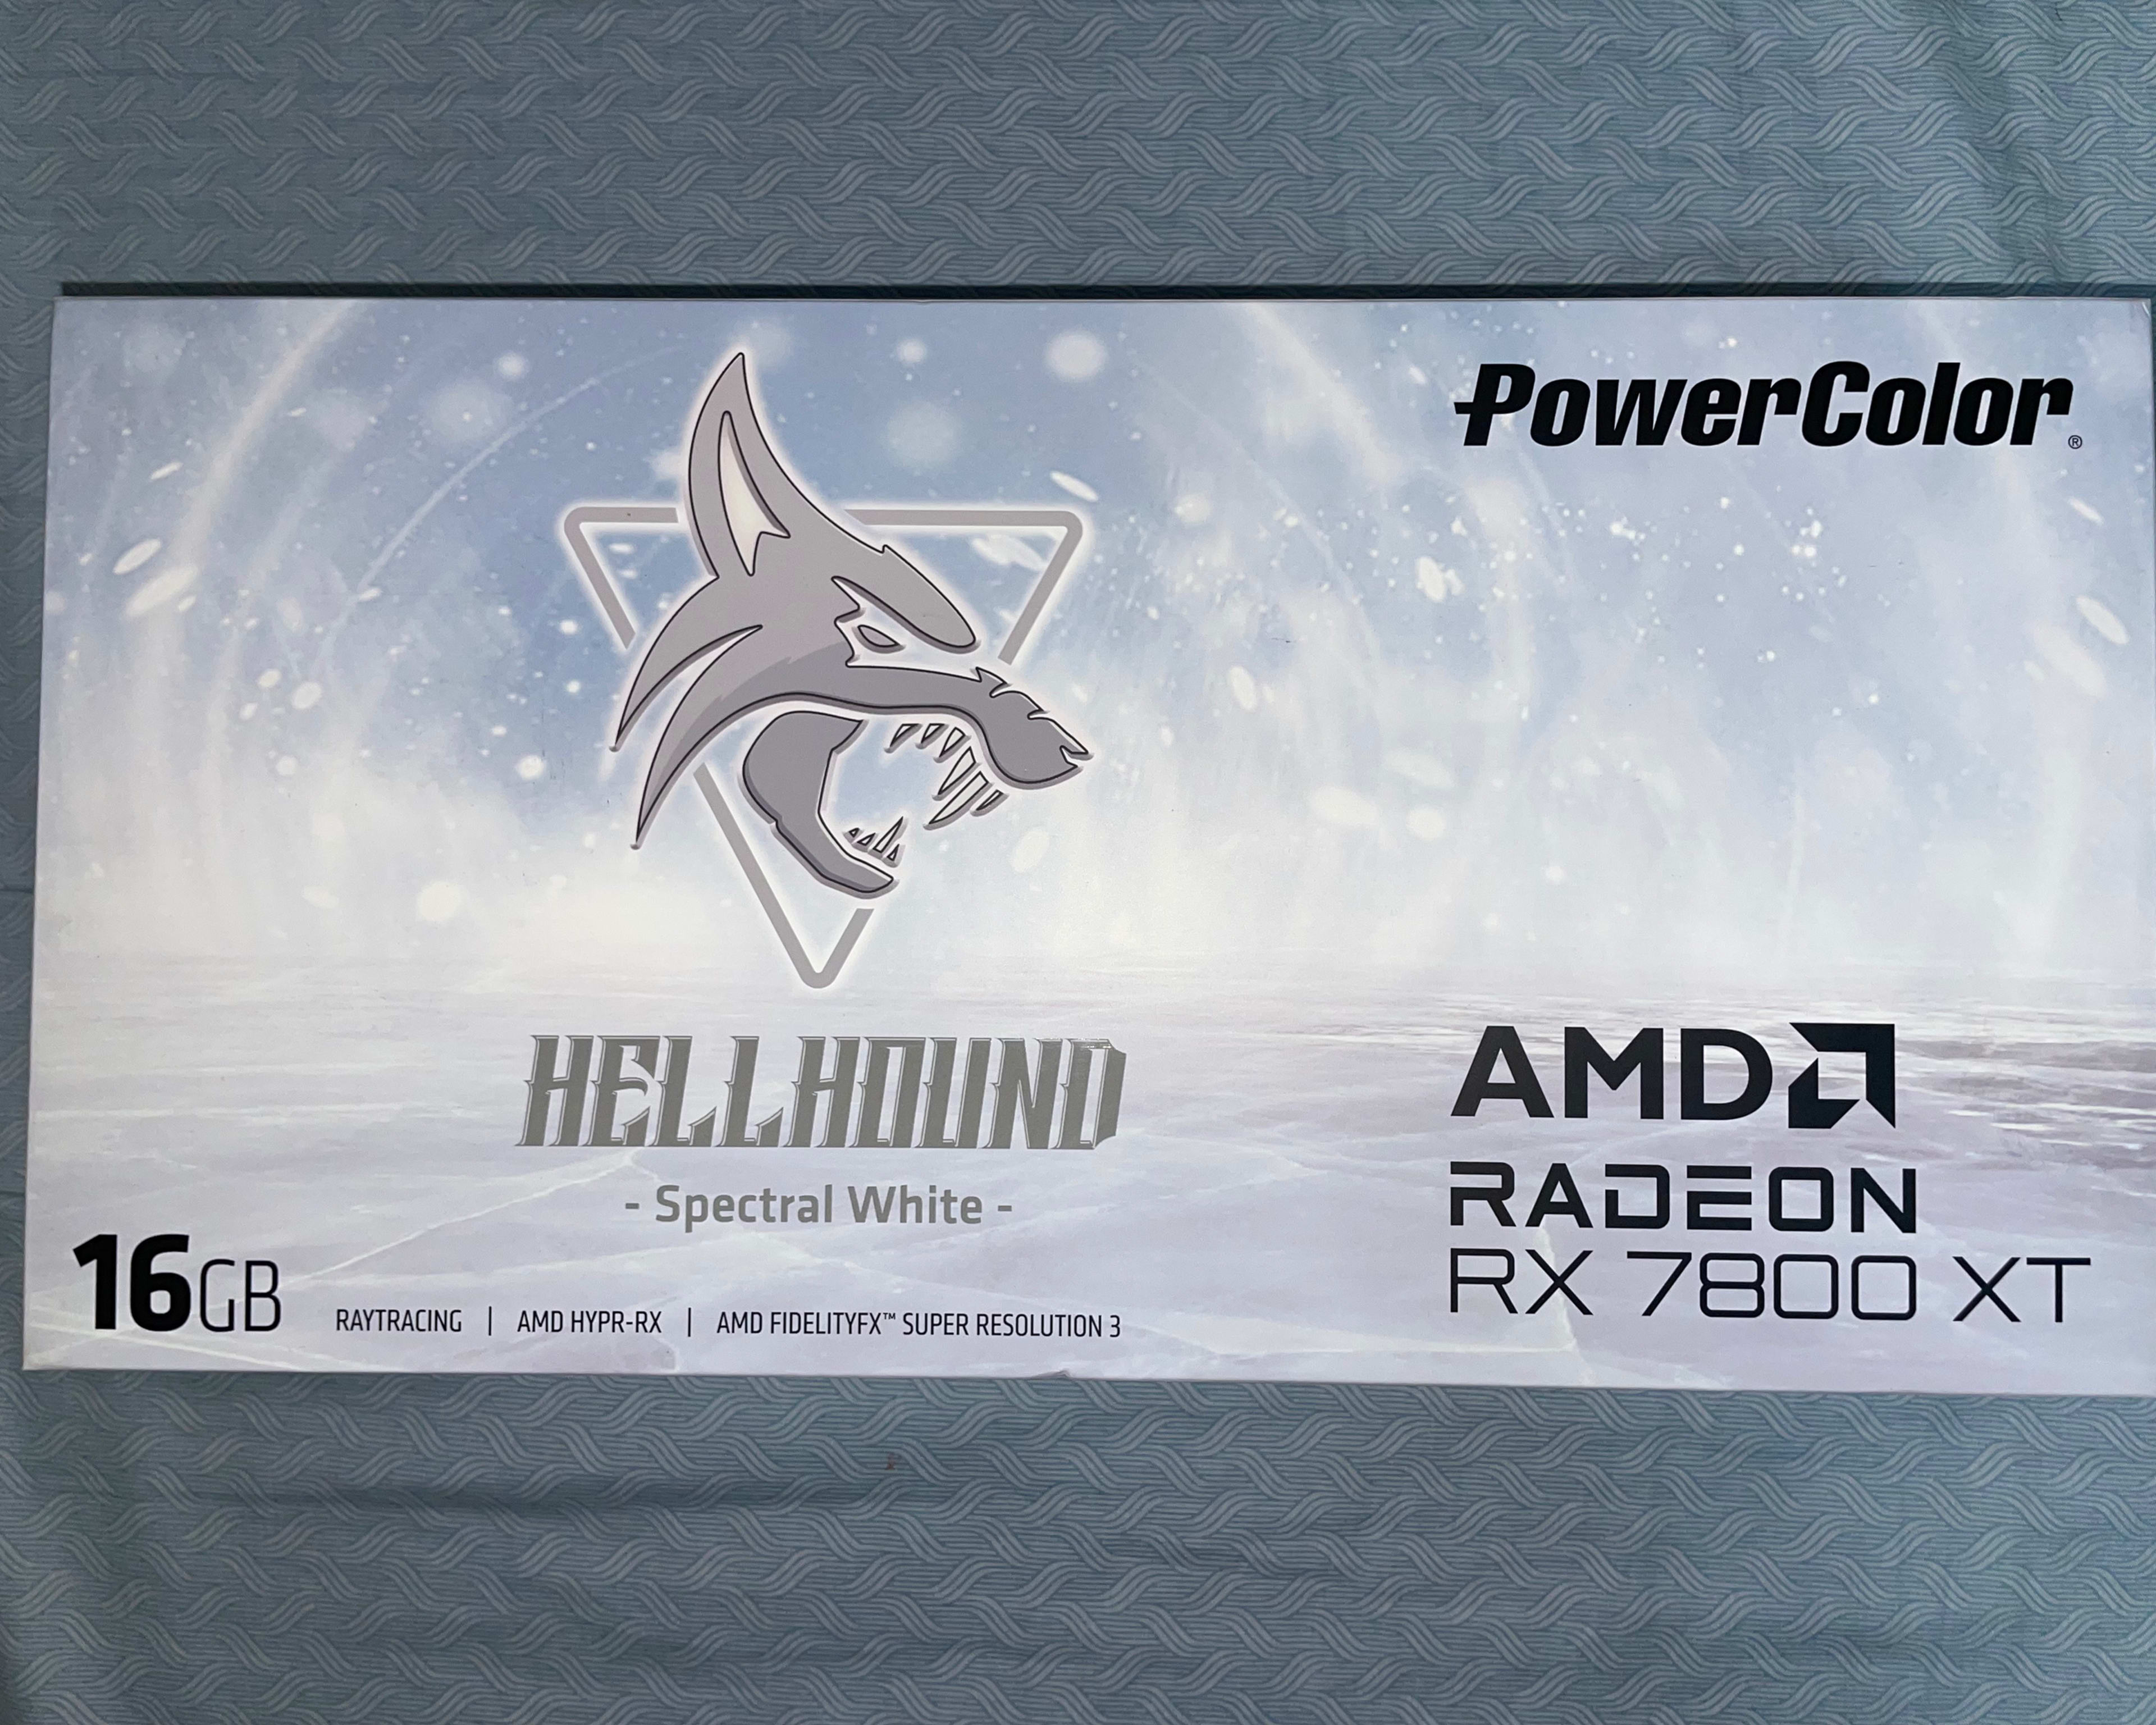 PowerColor Hellhound Spectral White RX 7800 XT